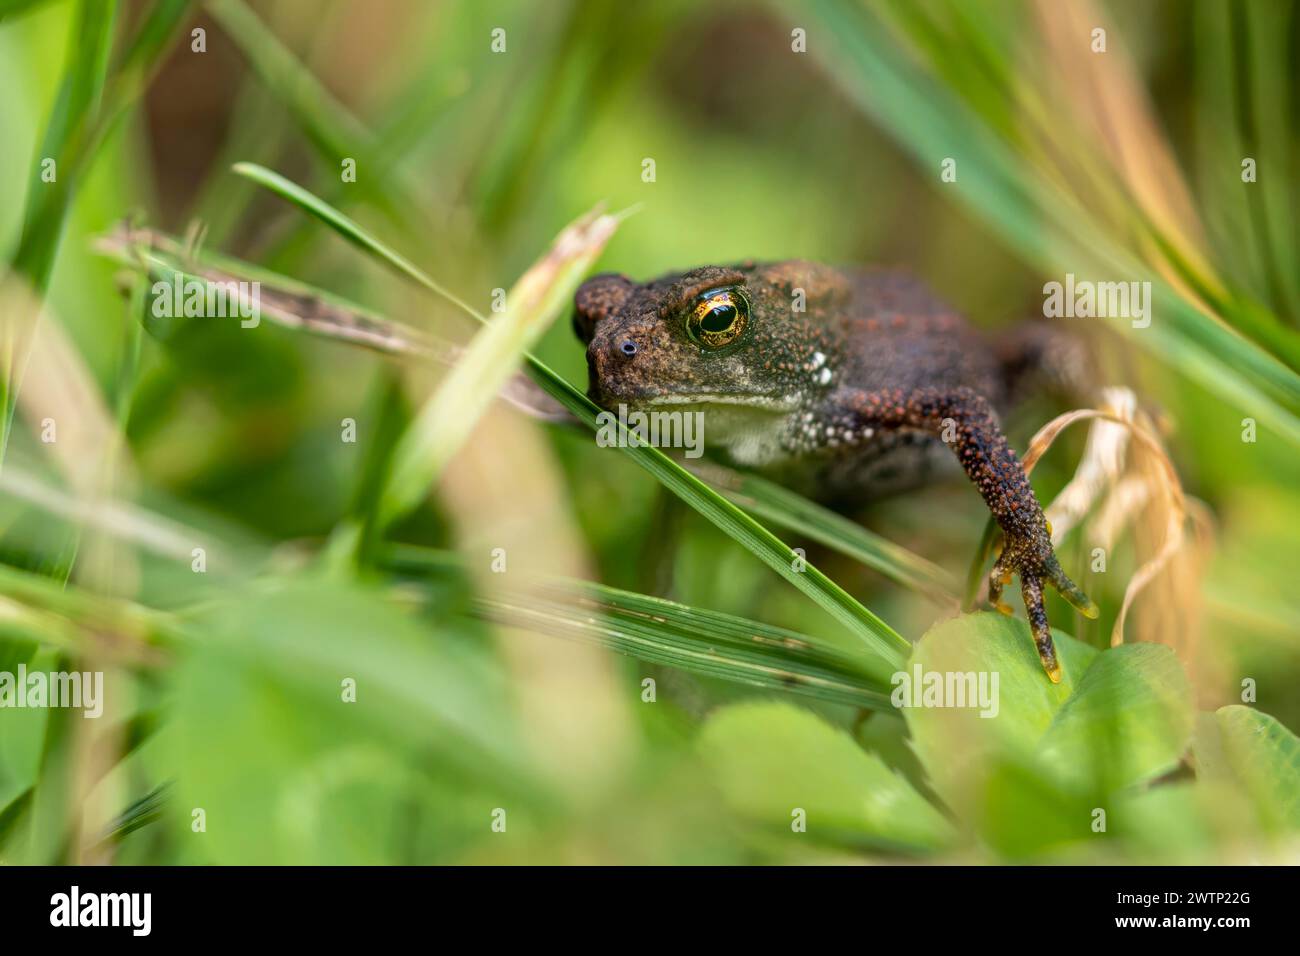 A small juvenile toad with large glassy eyes rests among the blades of grass in a summery field. Stock Photo